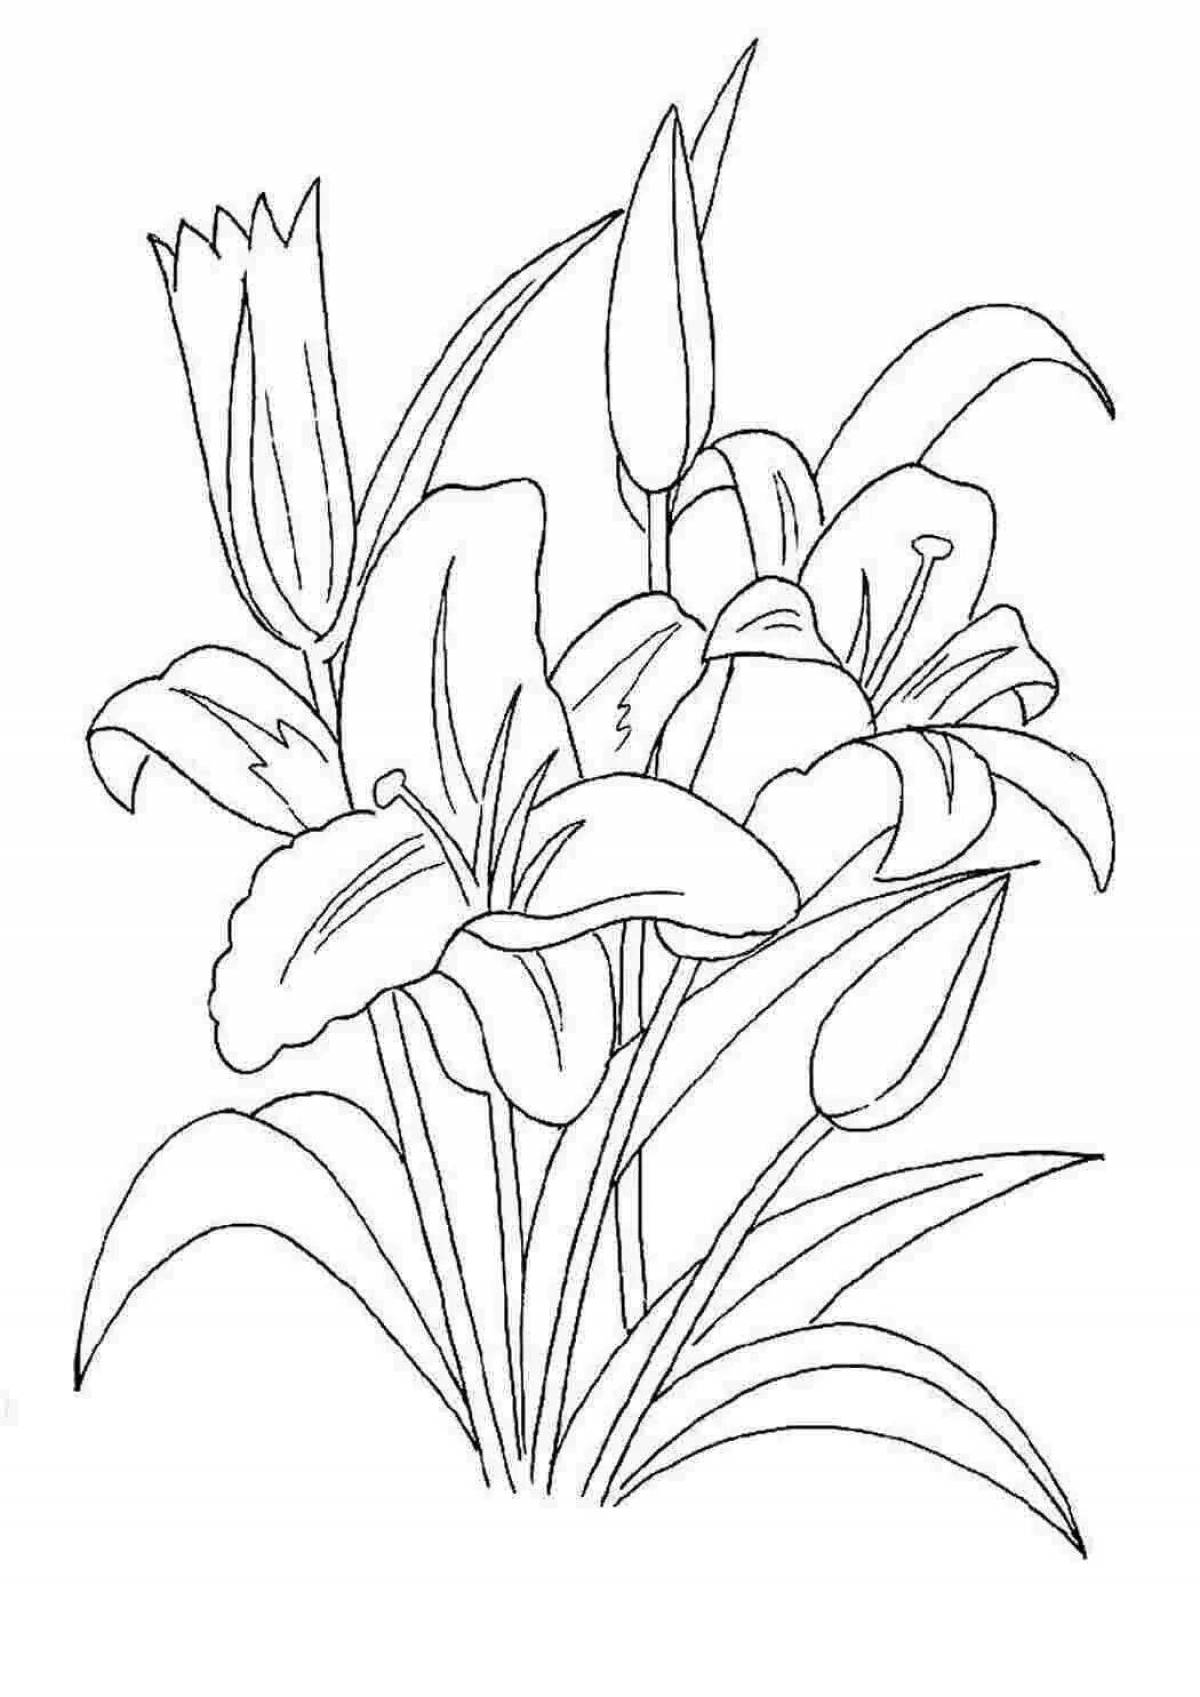 Exotic garden flowers coloring book